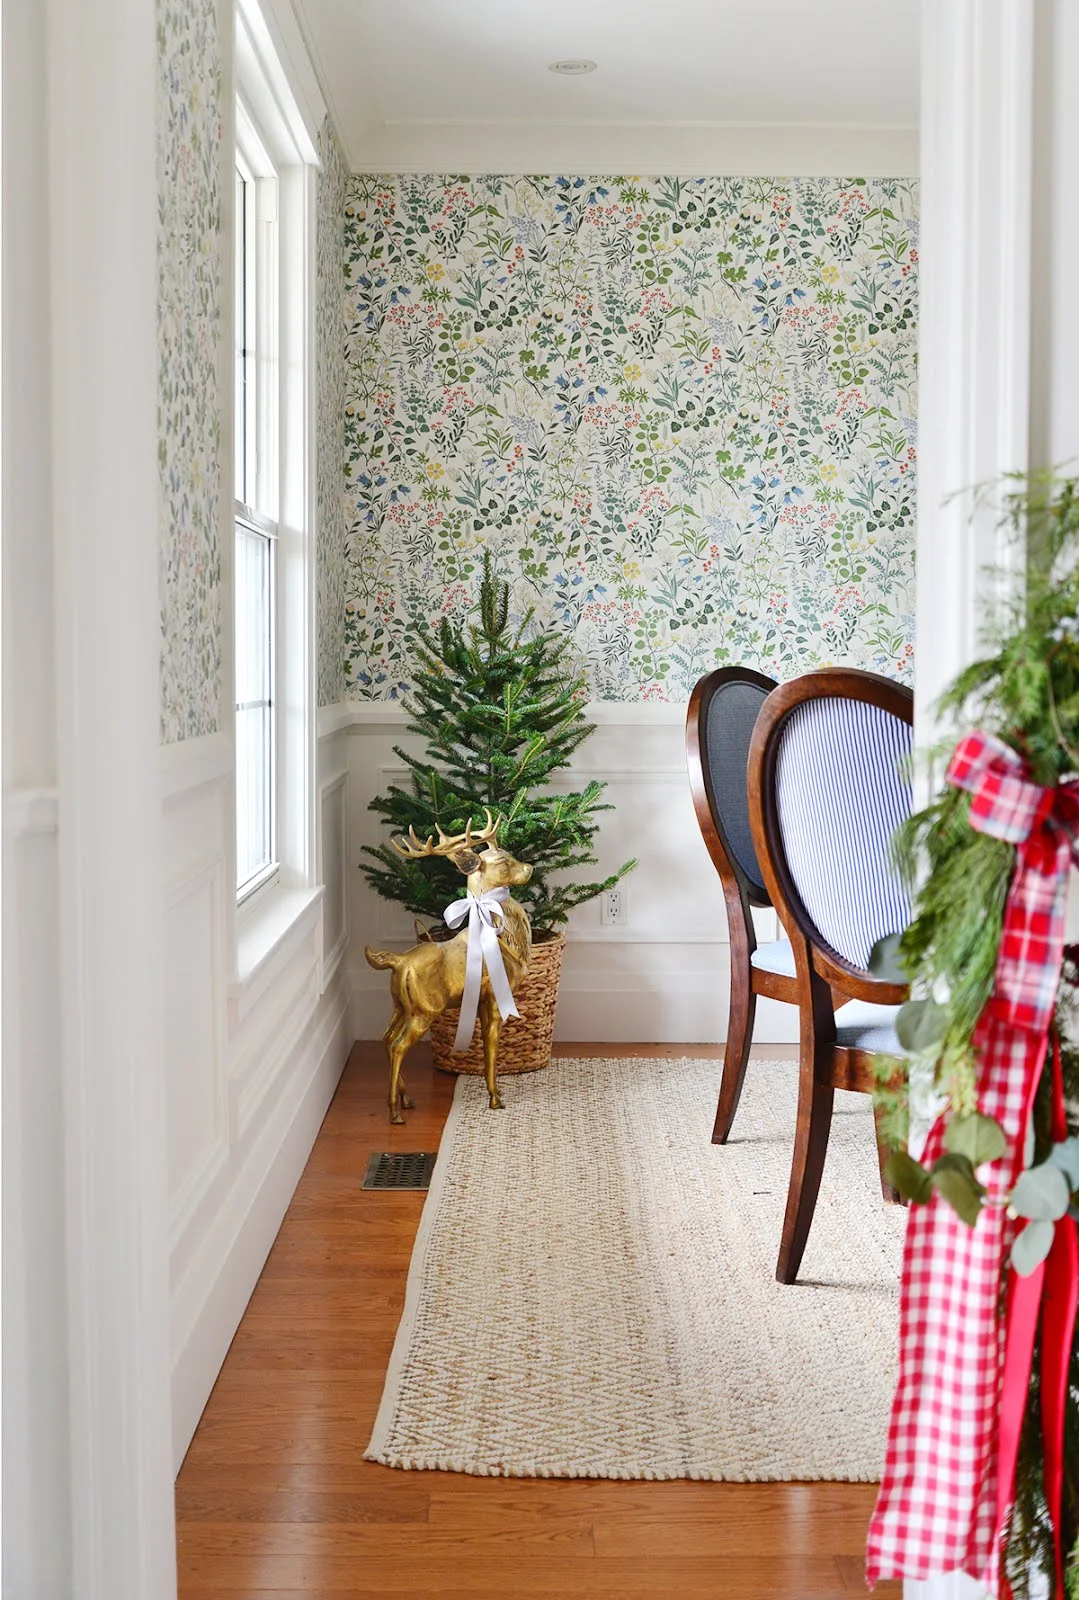 floral wallpaper in dining room, small christmas tree in basket, brass dear